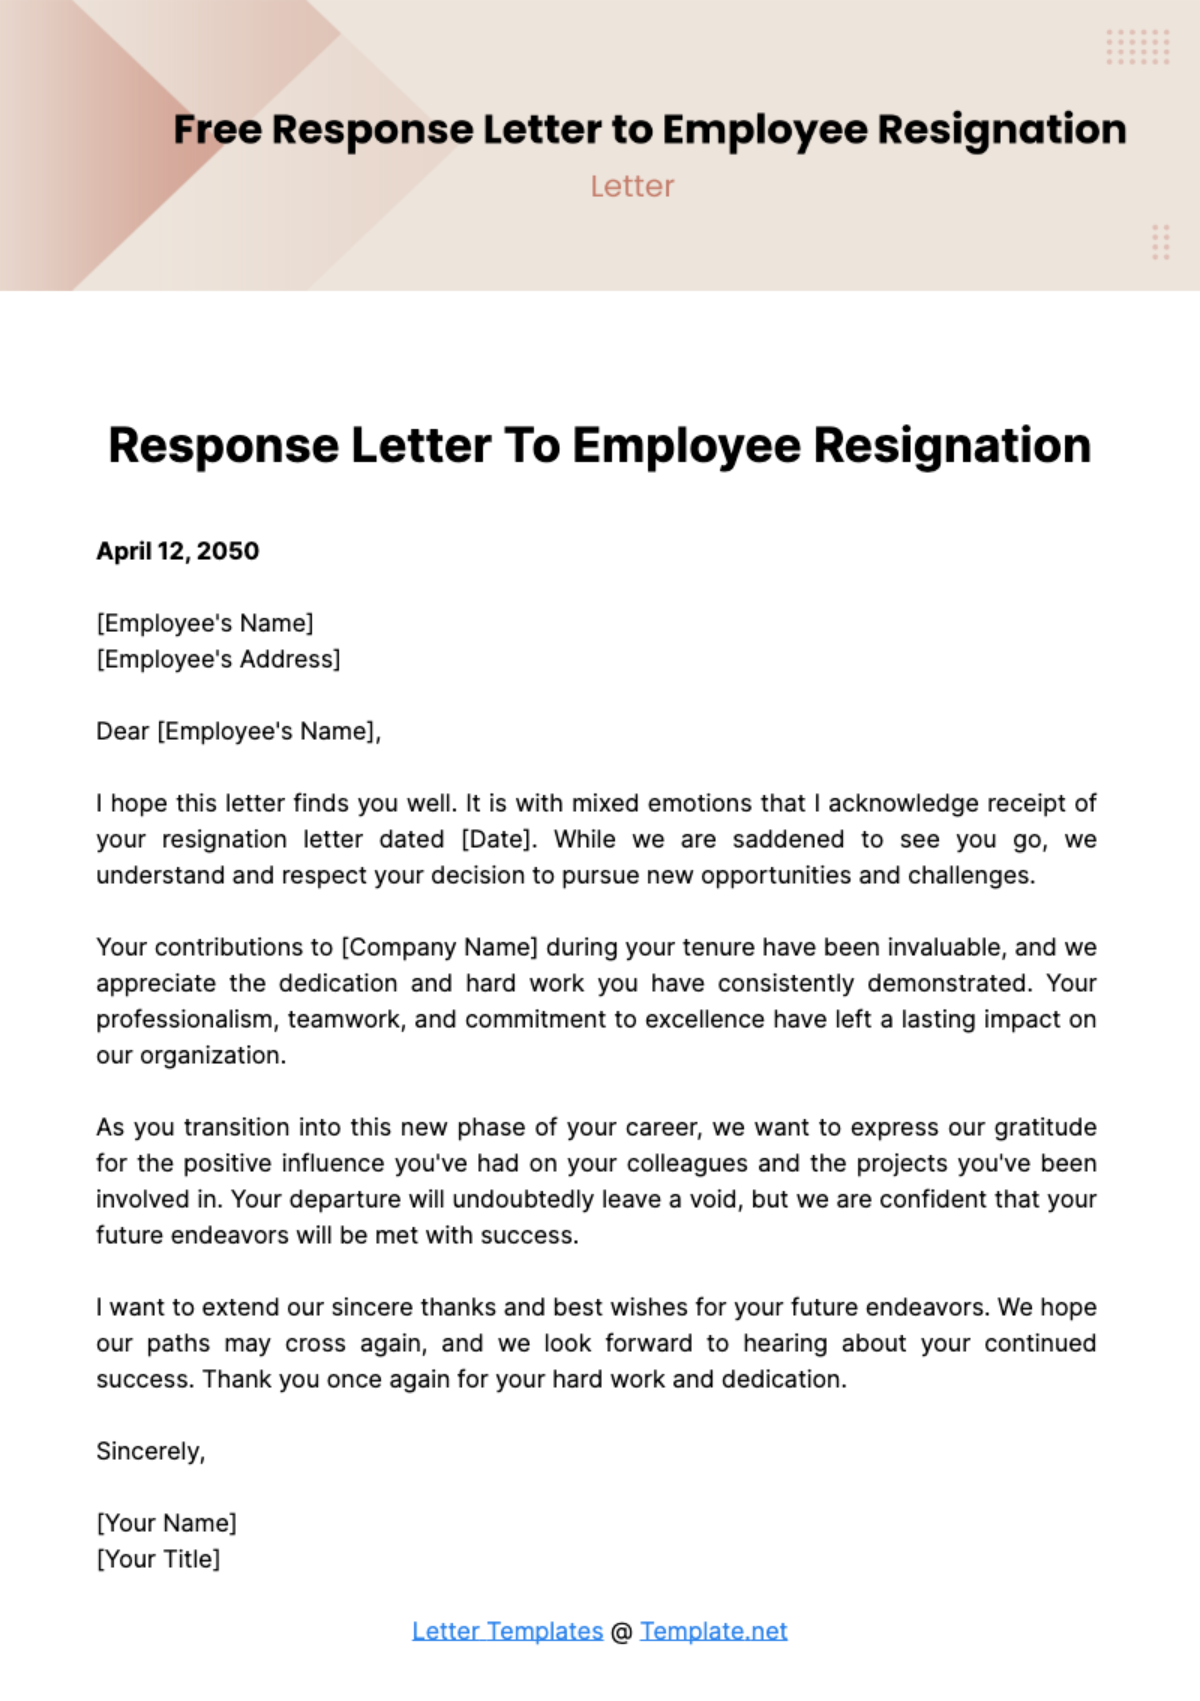 Free Response Letter to Employee Resignation Template